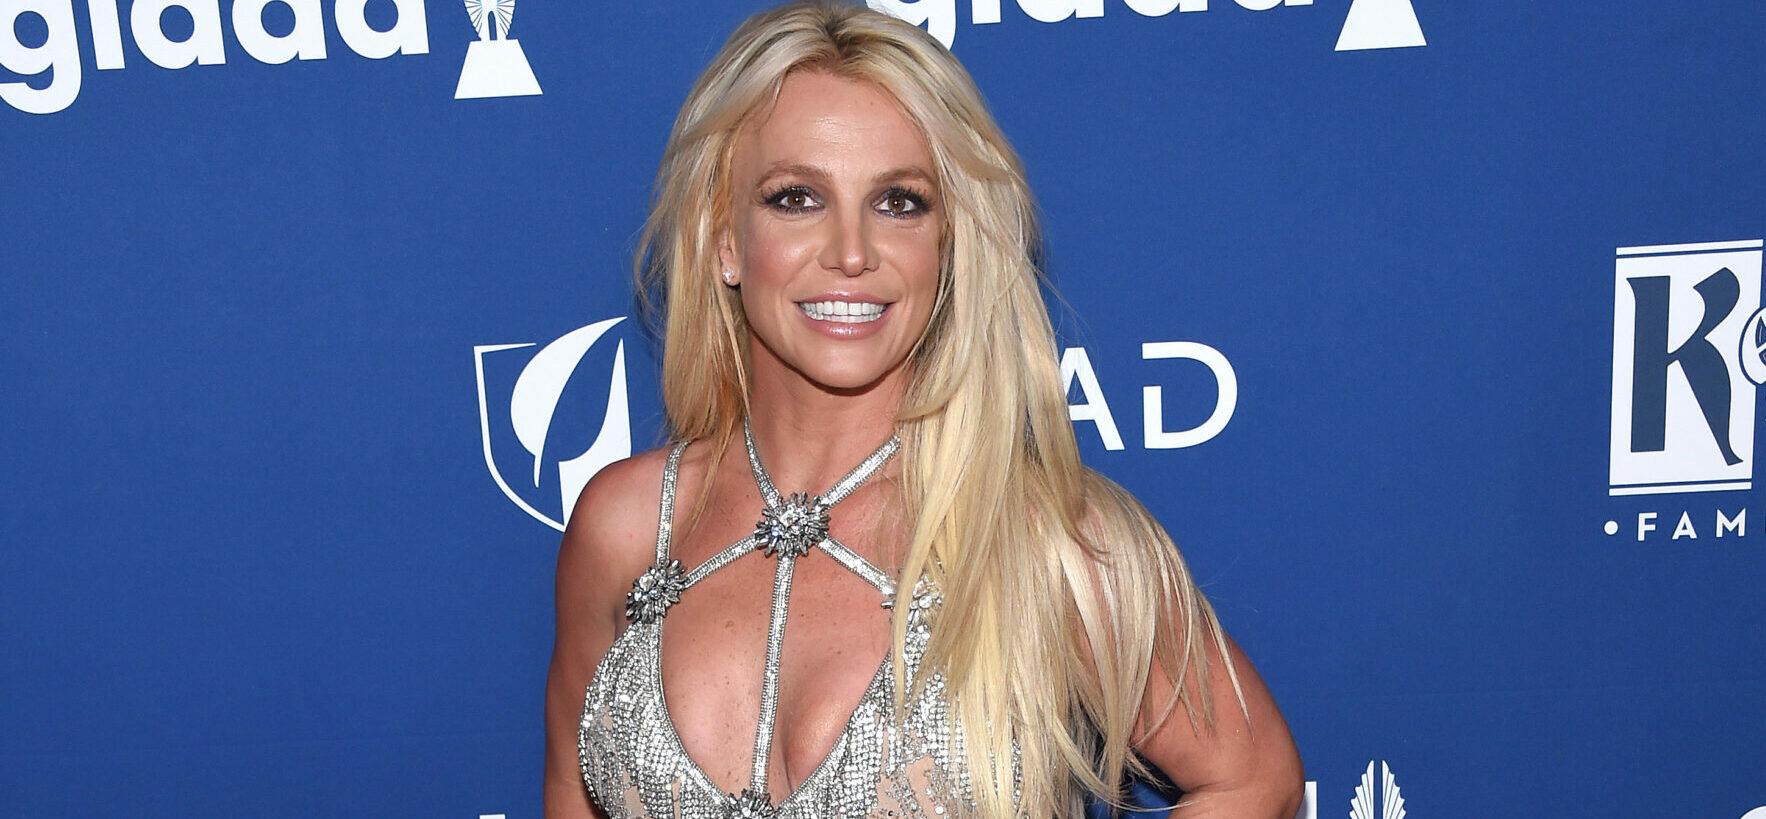 Britney Spears Says ‘Good Morning’ Topless In Bed